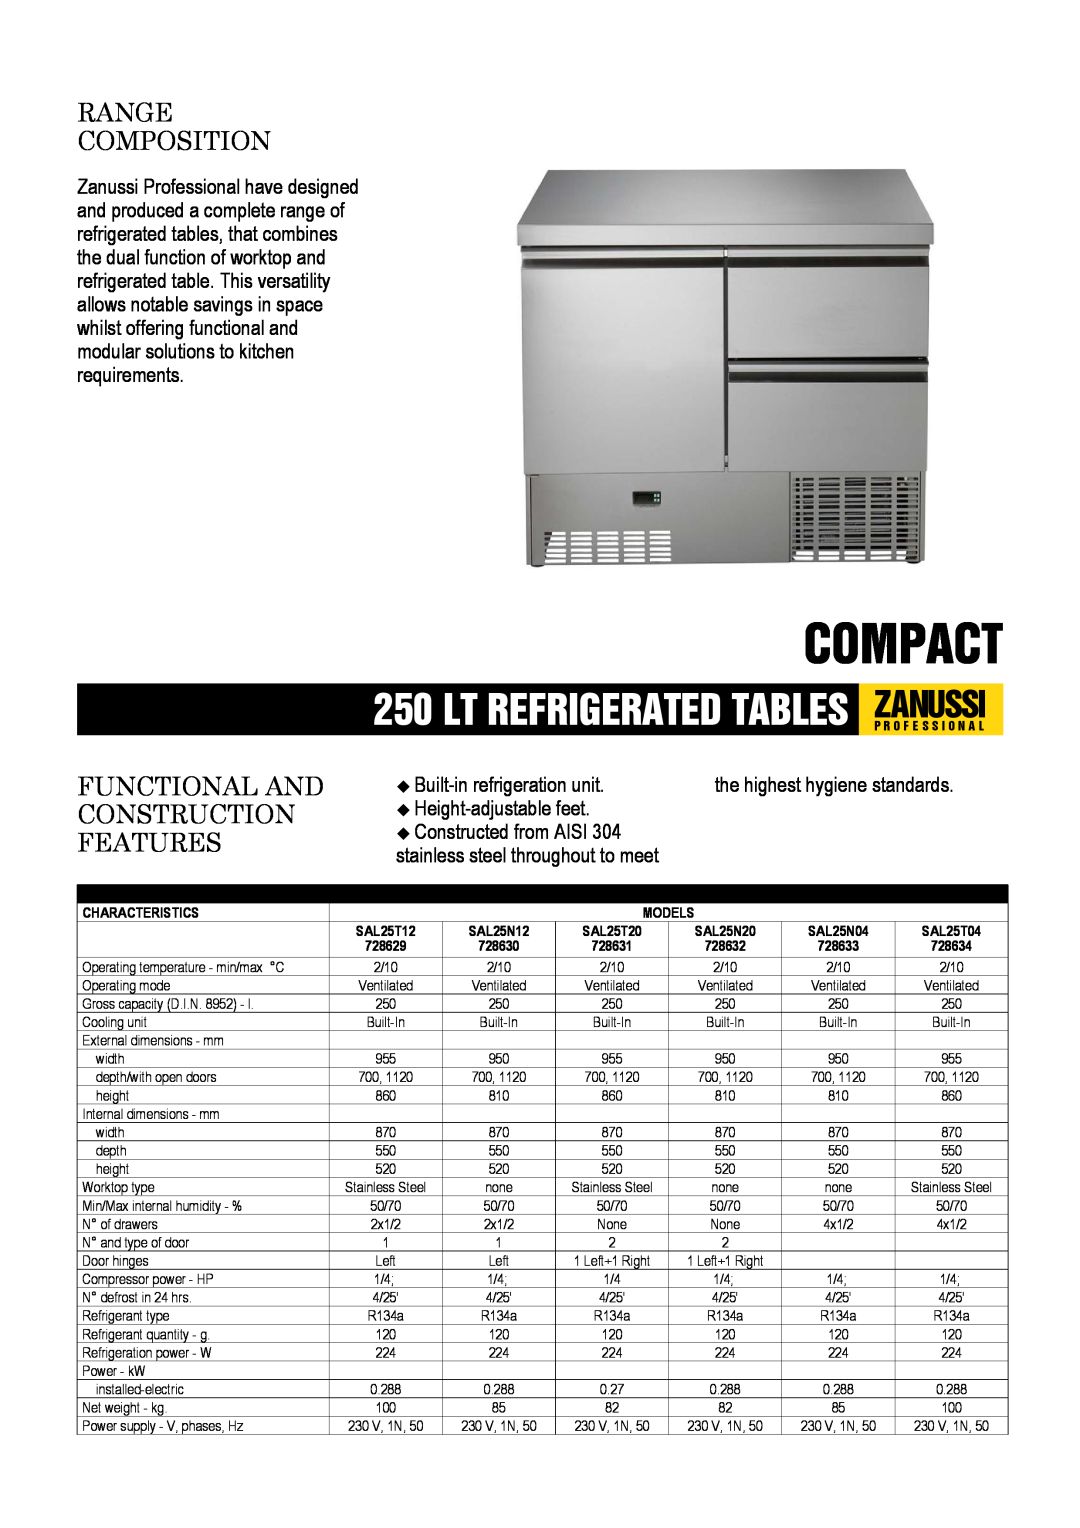 Zanussi 728629 dimensions Compact, Range Composition, Functional And Construction Features, the highest hygiene standards 